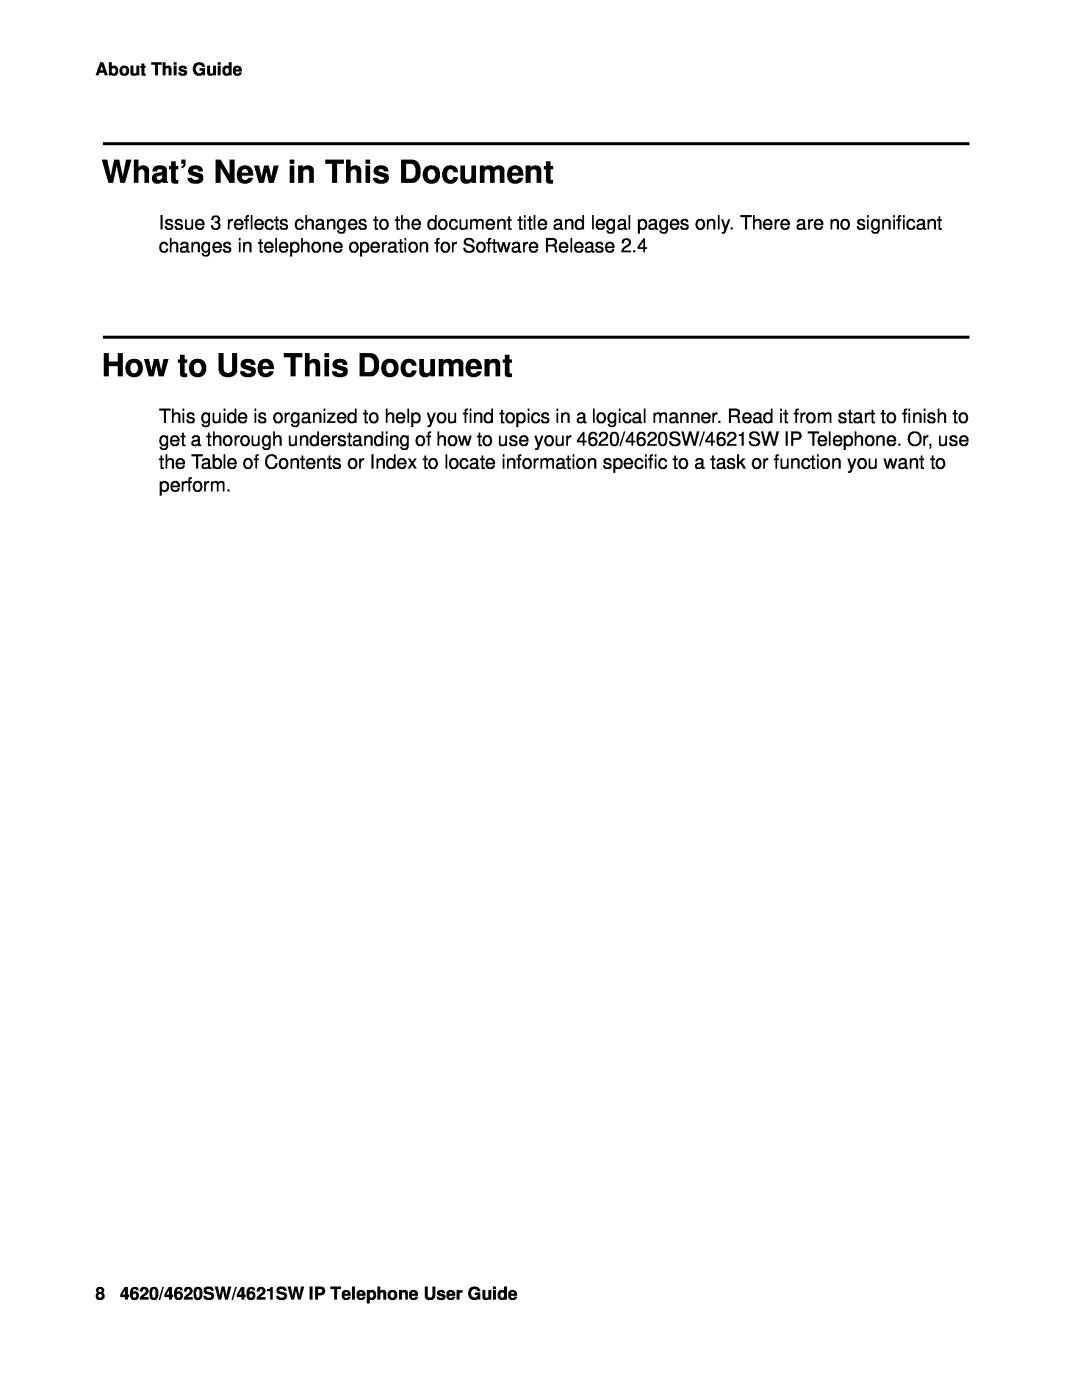 Avaya 4621SW, 4620SW manual What’s New in This Document, How to Use This Document, About This Guide 